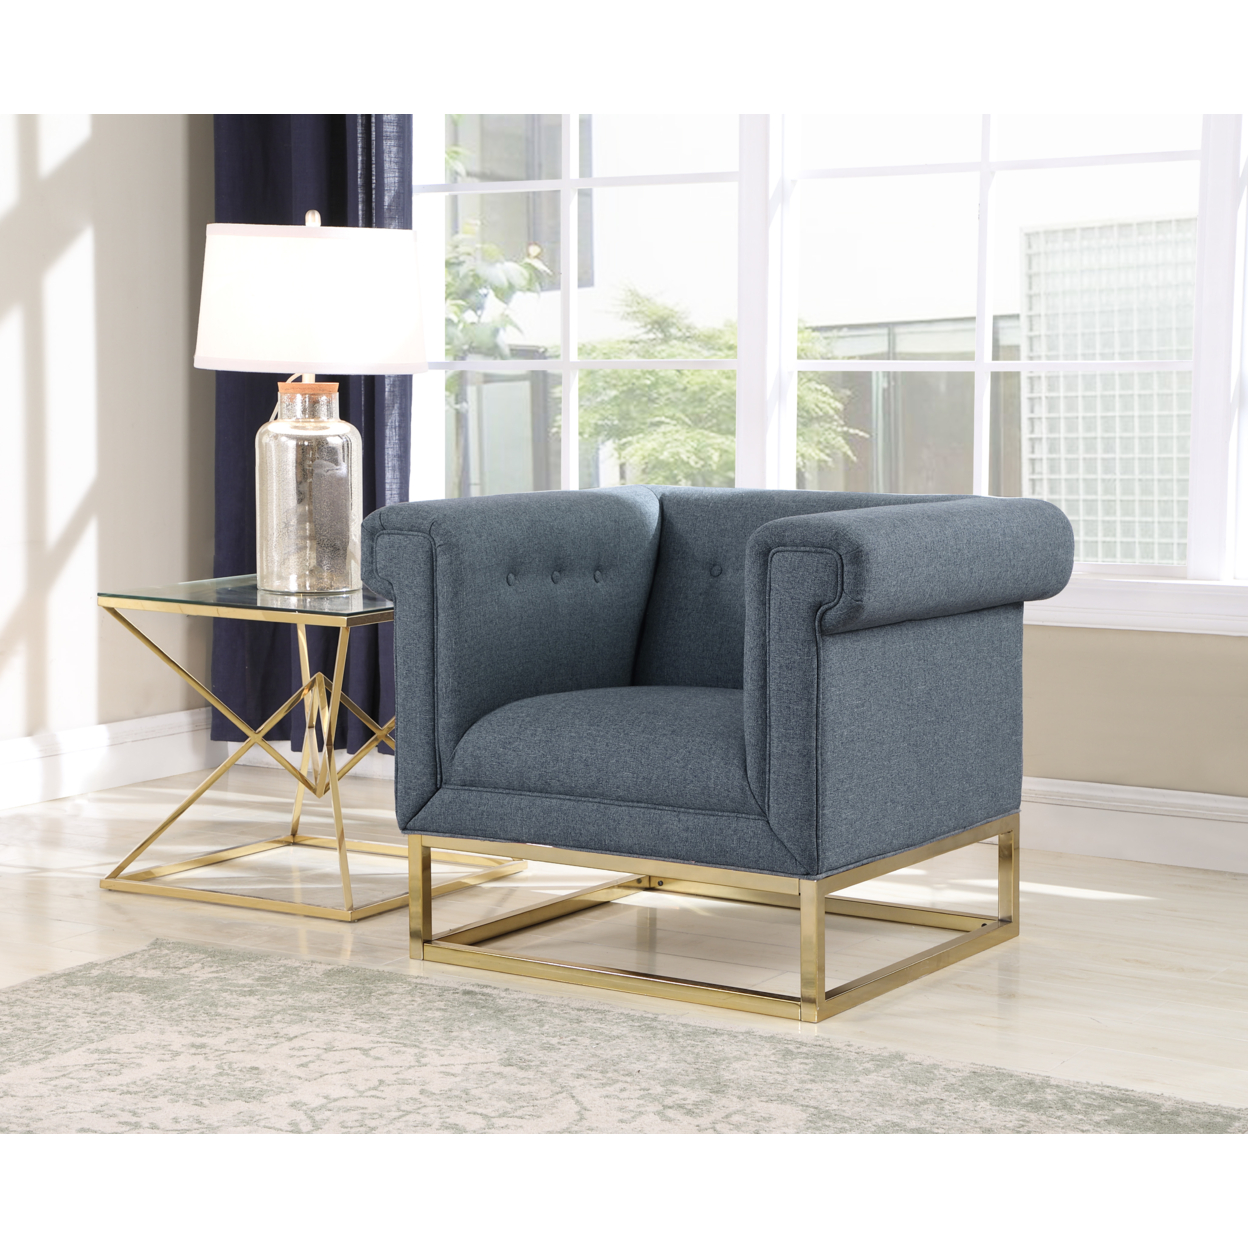 Cassandra Accent Club Chair Button Tufted Linen-Textured Plush Cushion Brass Finished Brushed Metal Base Frame - Blue